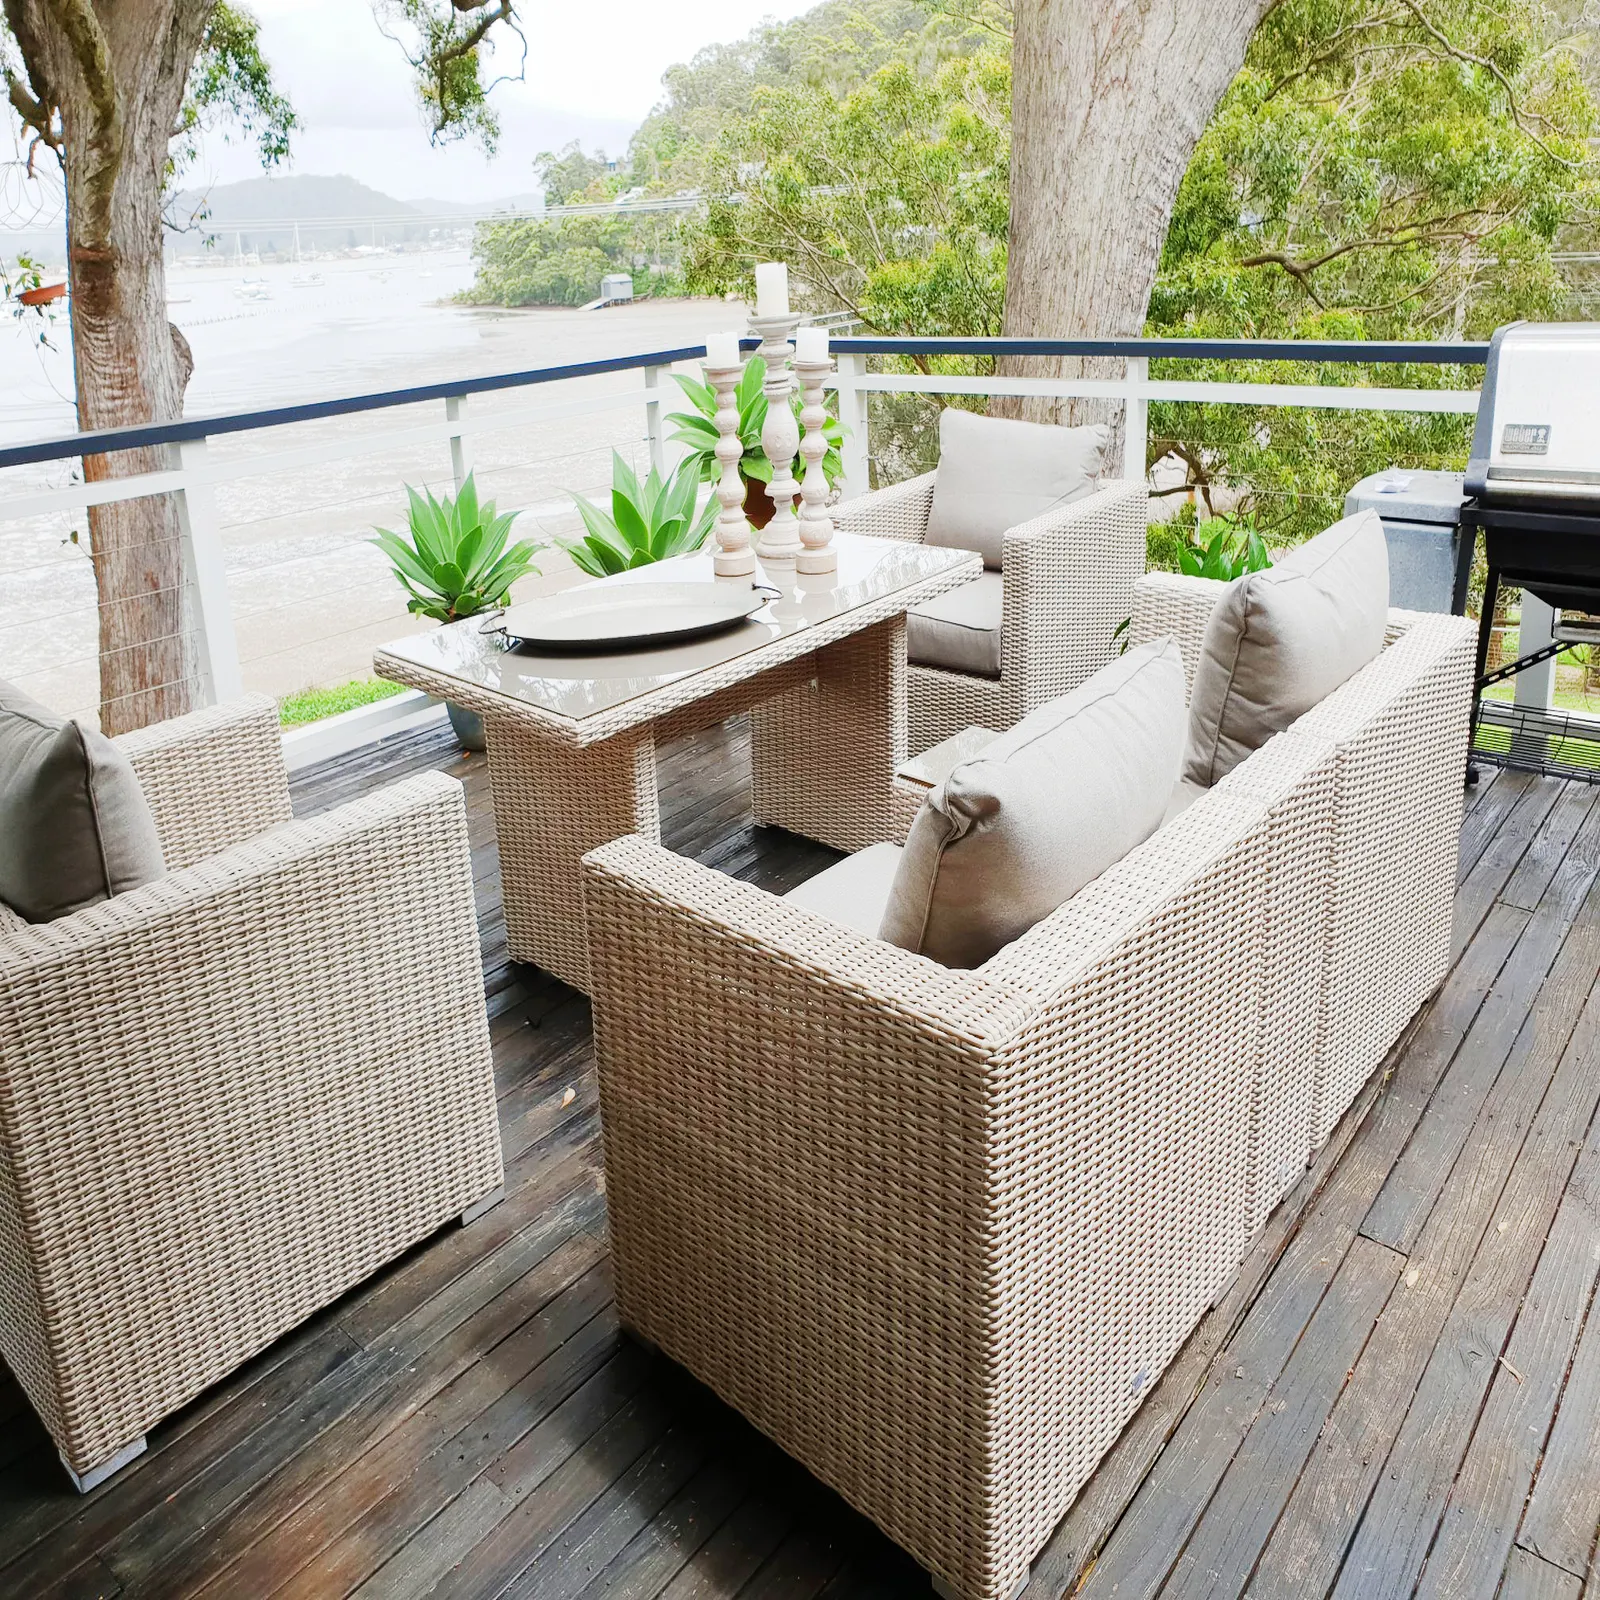 Rattan Garden Sofa Set DL 4 Seats, 1 Table Highlights Chic, Inviting Design Comfortable, Removable Seat And Back Cushions